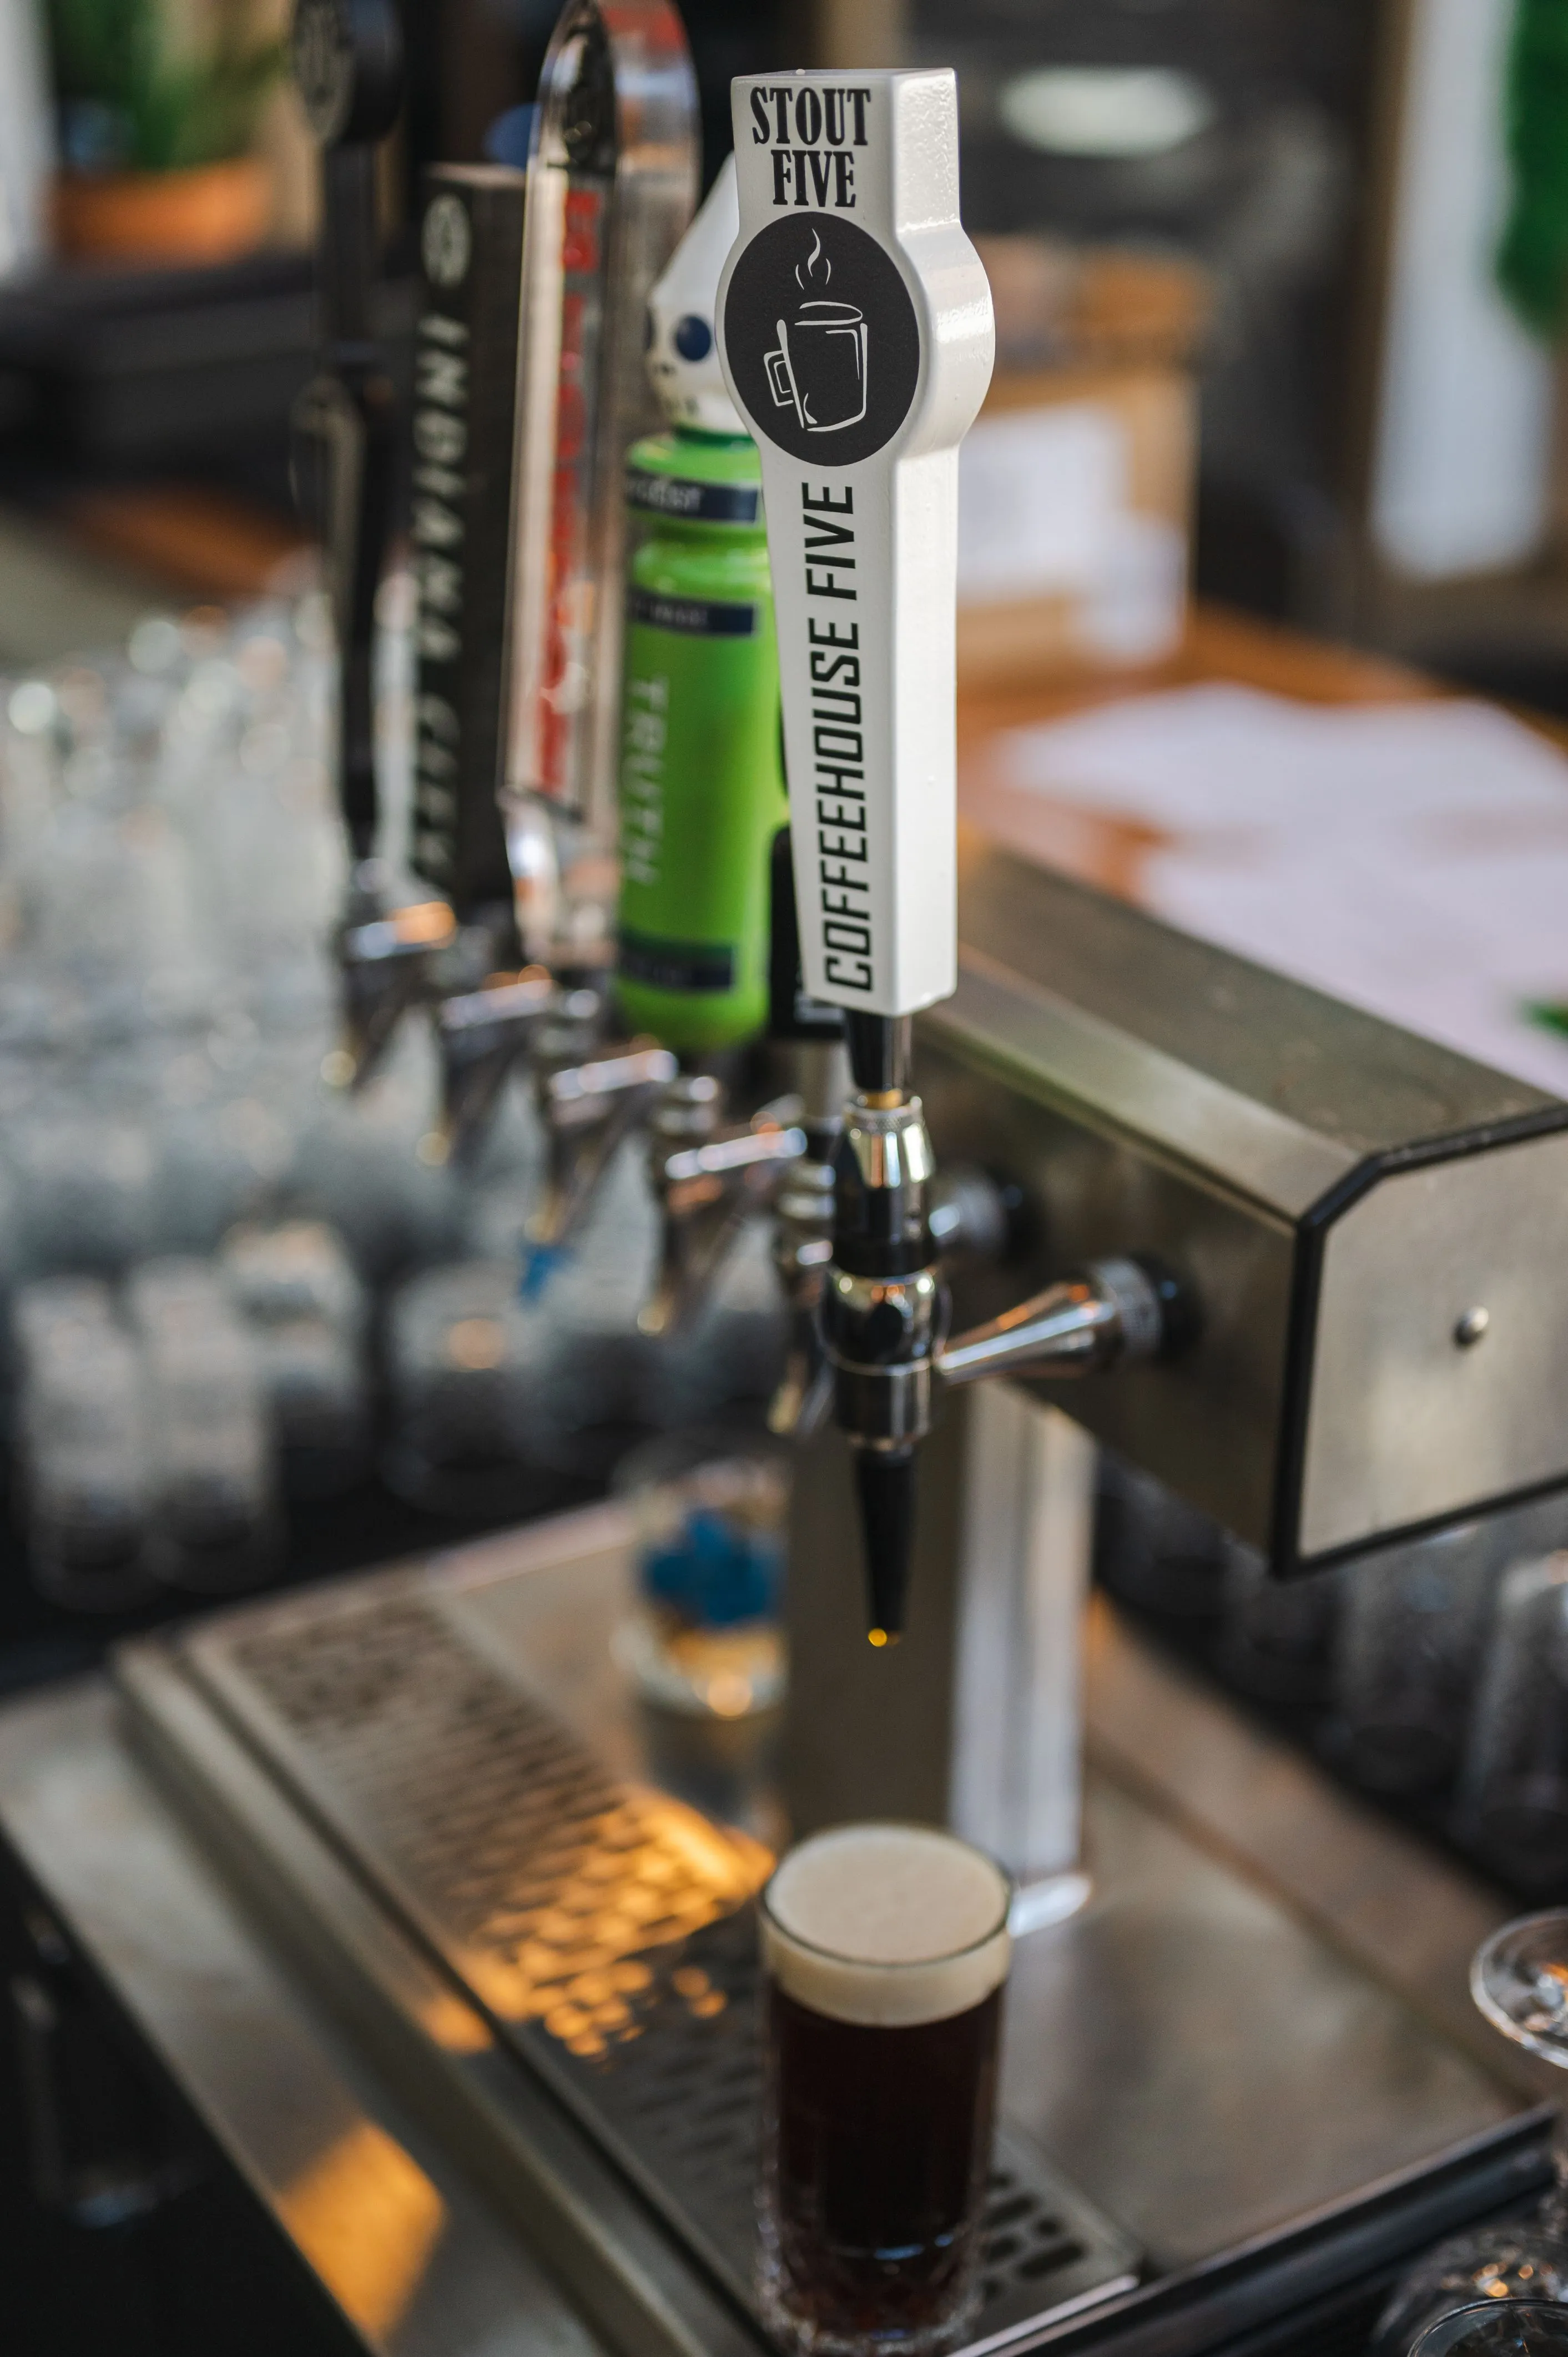 Close-up of a row of beer taps at a bar, with one featuring a "STOUT FIVE COFFEEHOUSE" label, and a pint of dark beer with a frothy head standing on the counter.